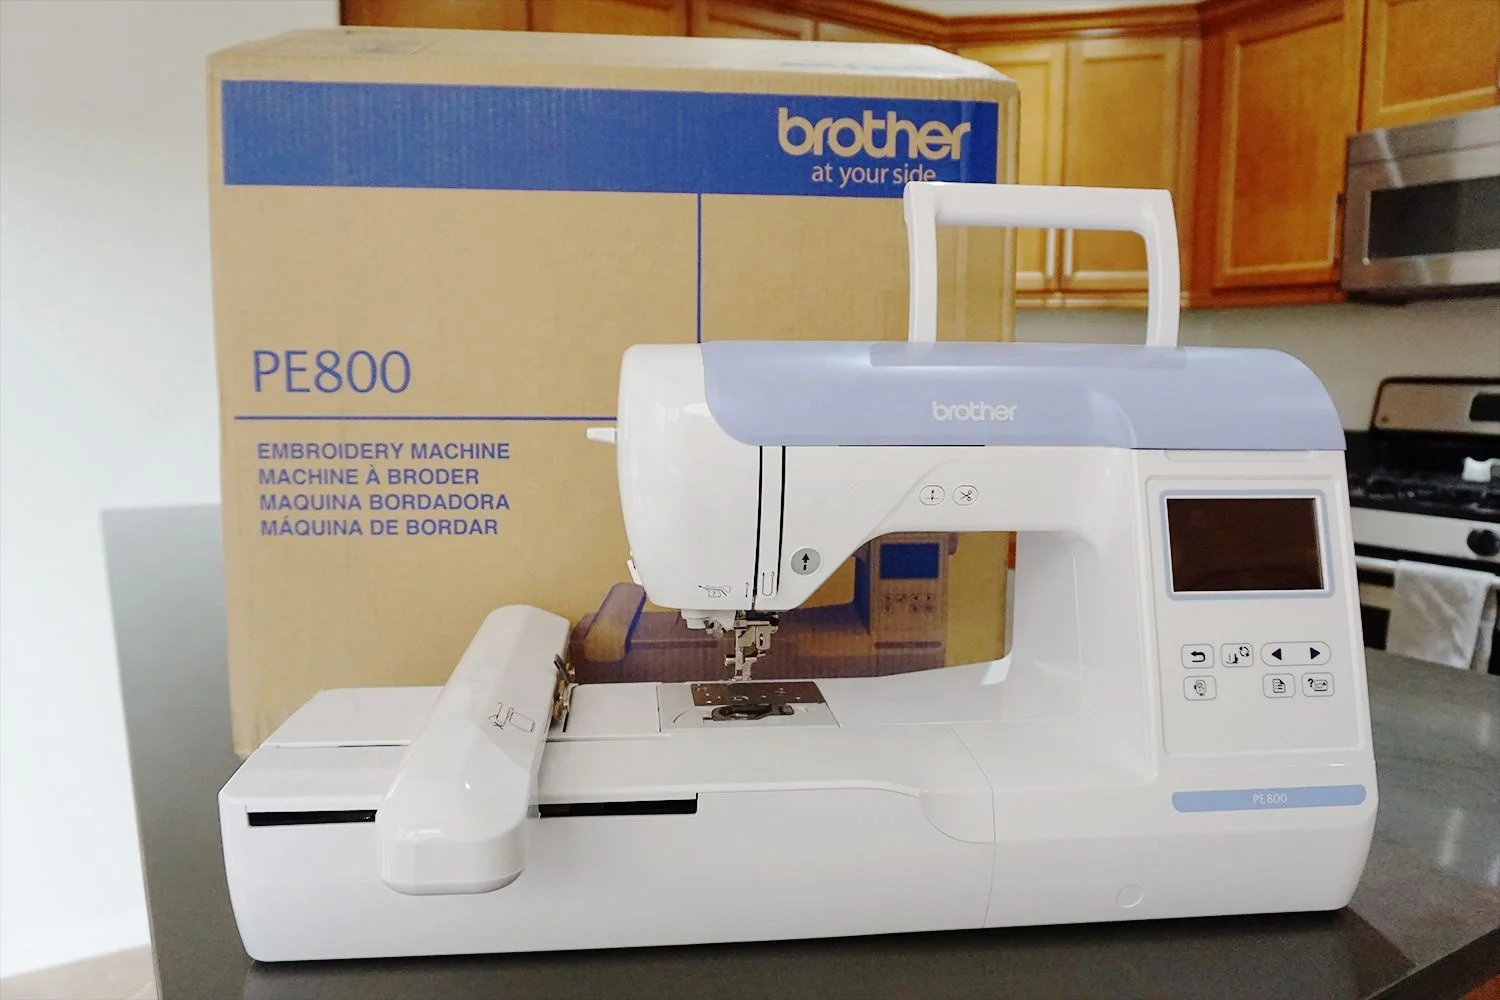 SUMMER SALES DISCOUNT ON Buy With Confidence New Original Outdoor Activities Brother PE800 Embroidery Machine 5x7", 138 Built-in